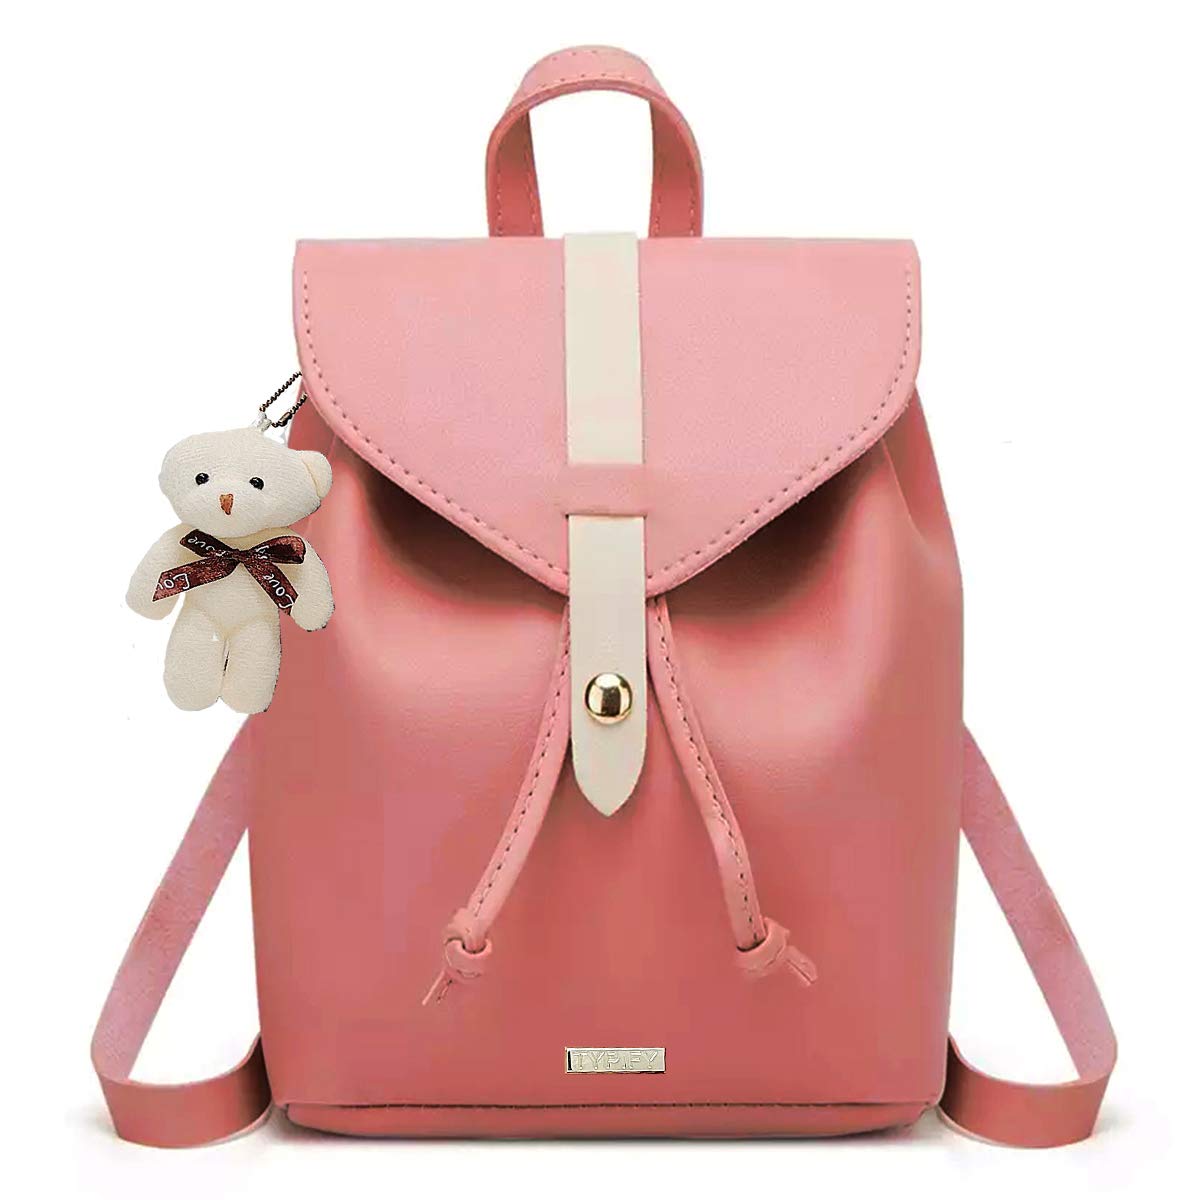 gifts for a 16 year old girl - TYPIFY PU Leather Women's Backpack  